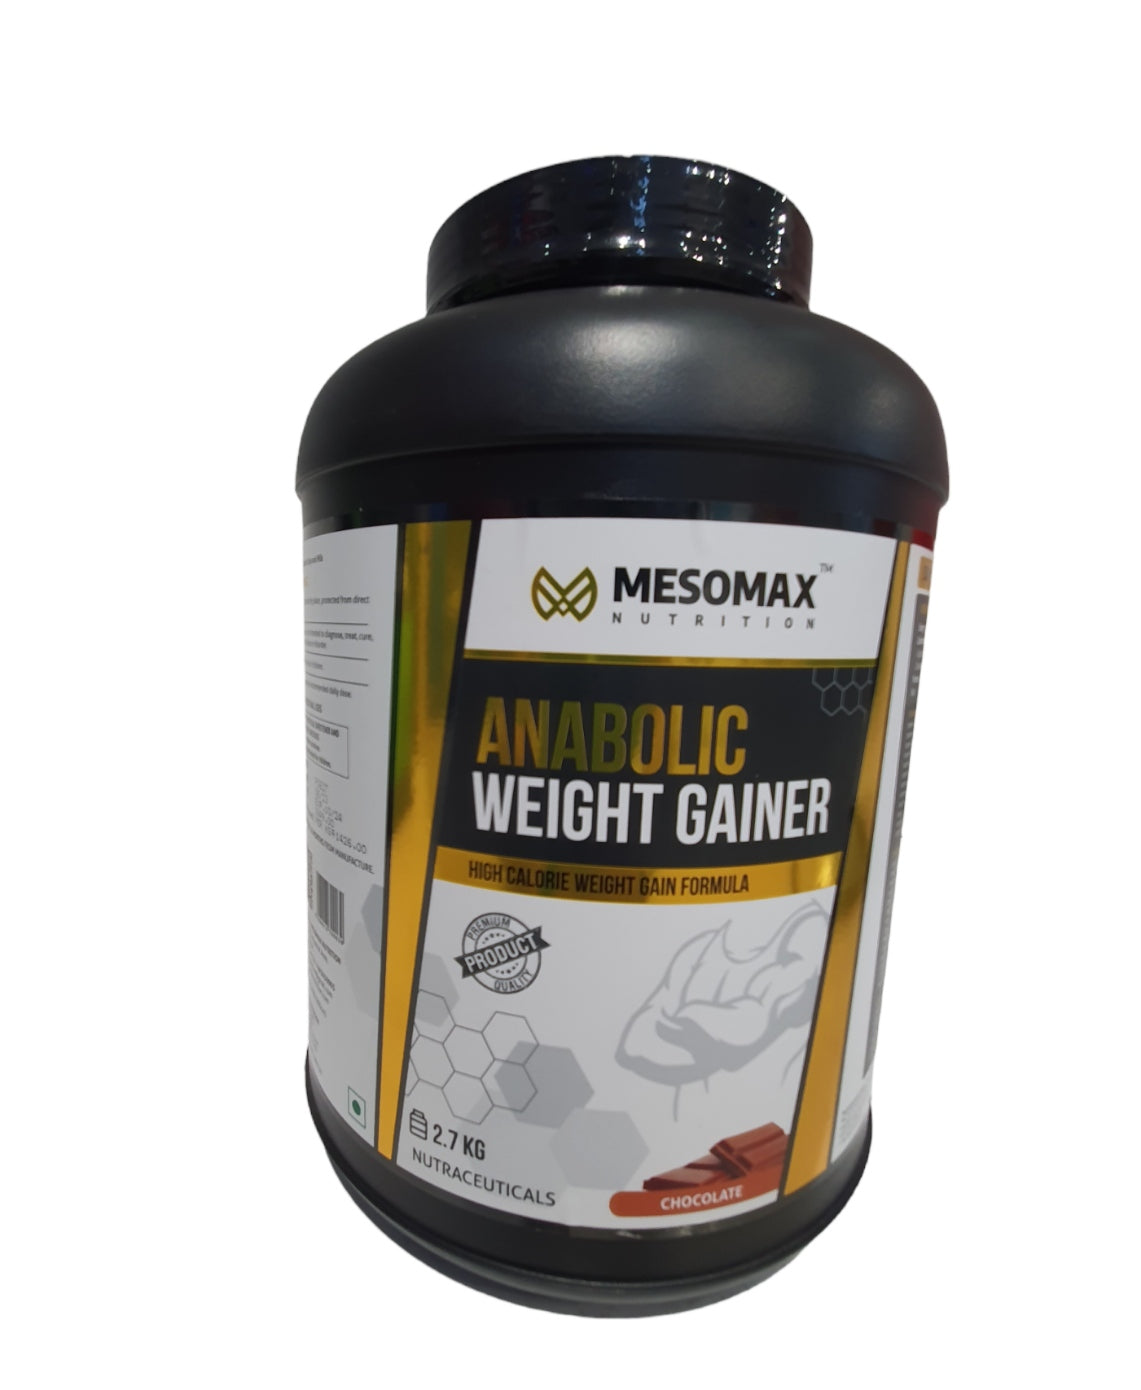 Mesomax Nutrition Anabolic Weight Gainer (High Calorie Weight Gain Formula)